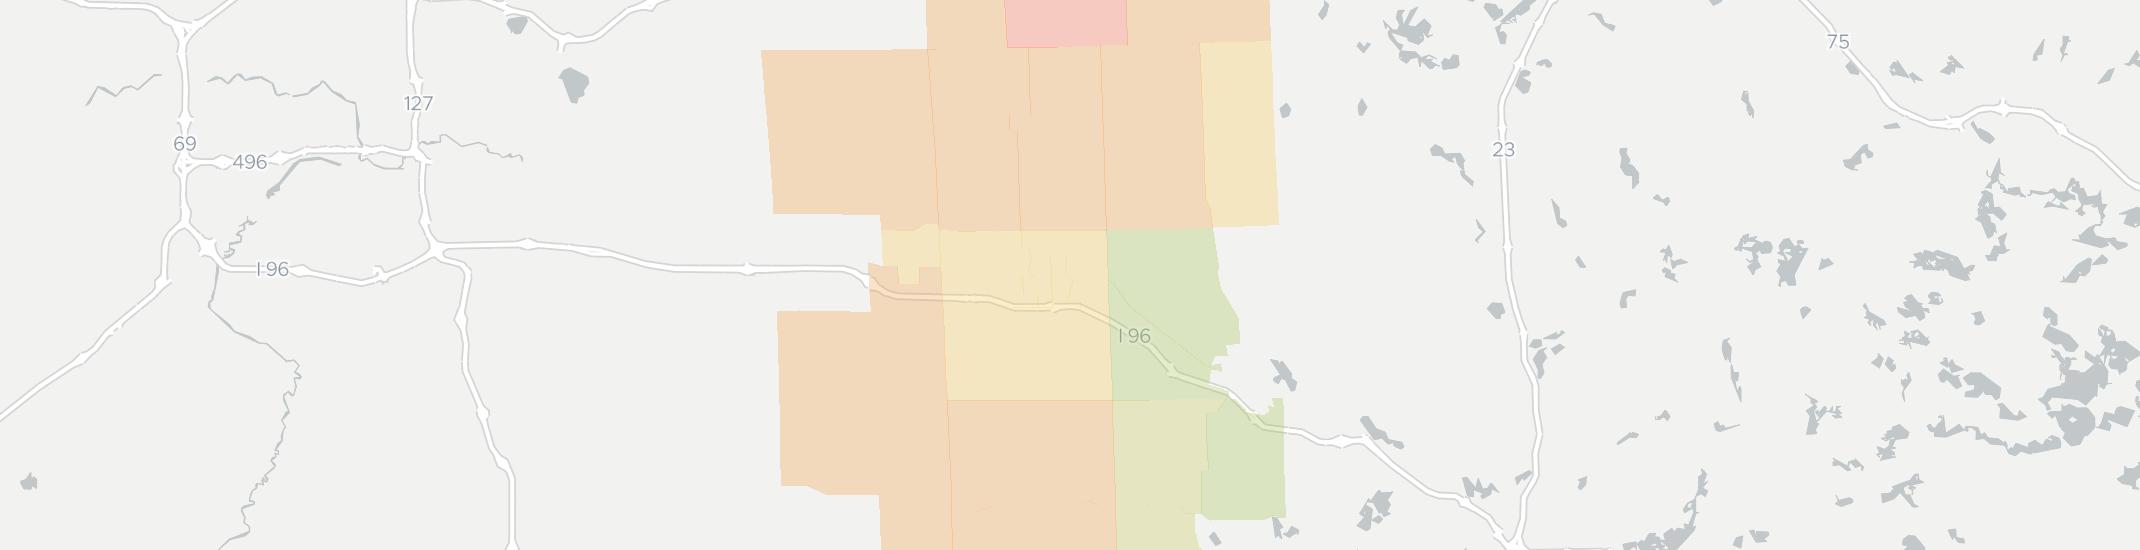 Fowlerville Internet Competition Map. Click for interactive map.